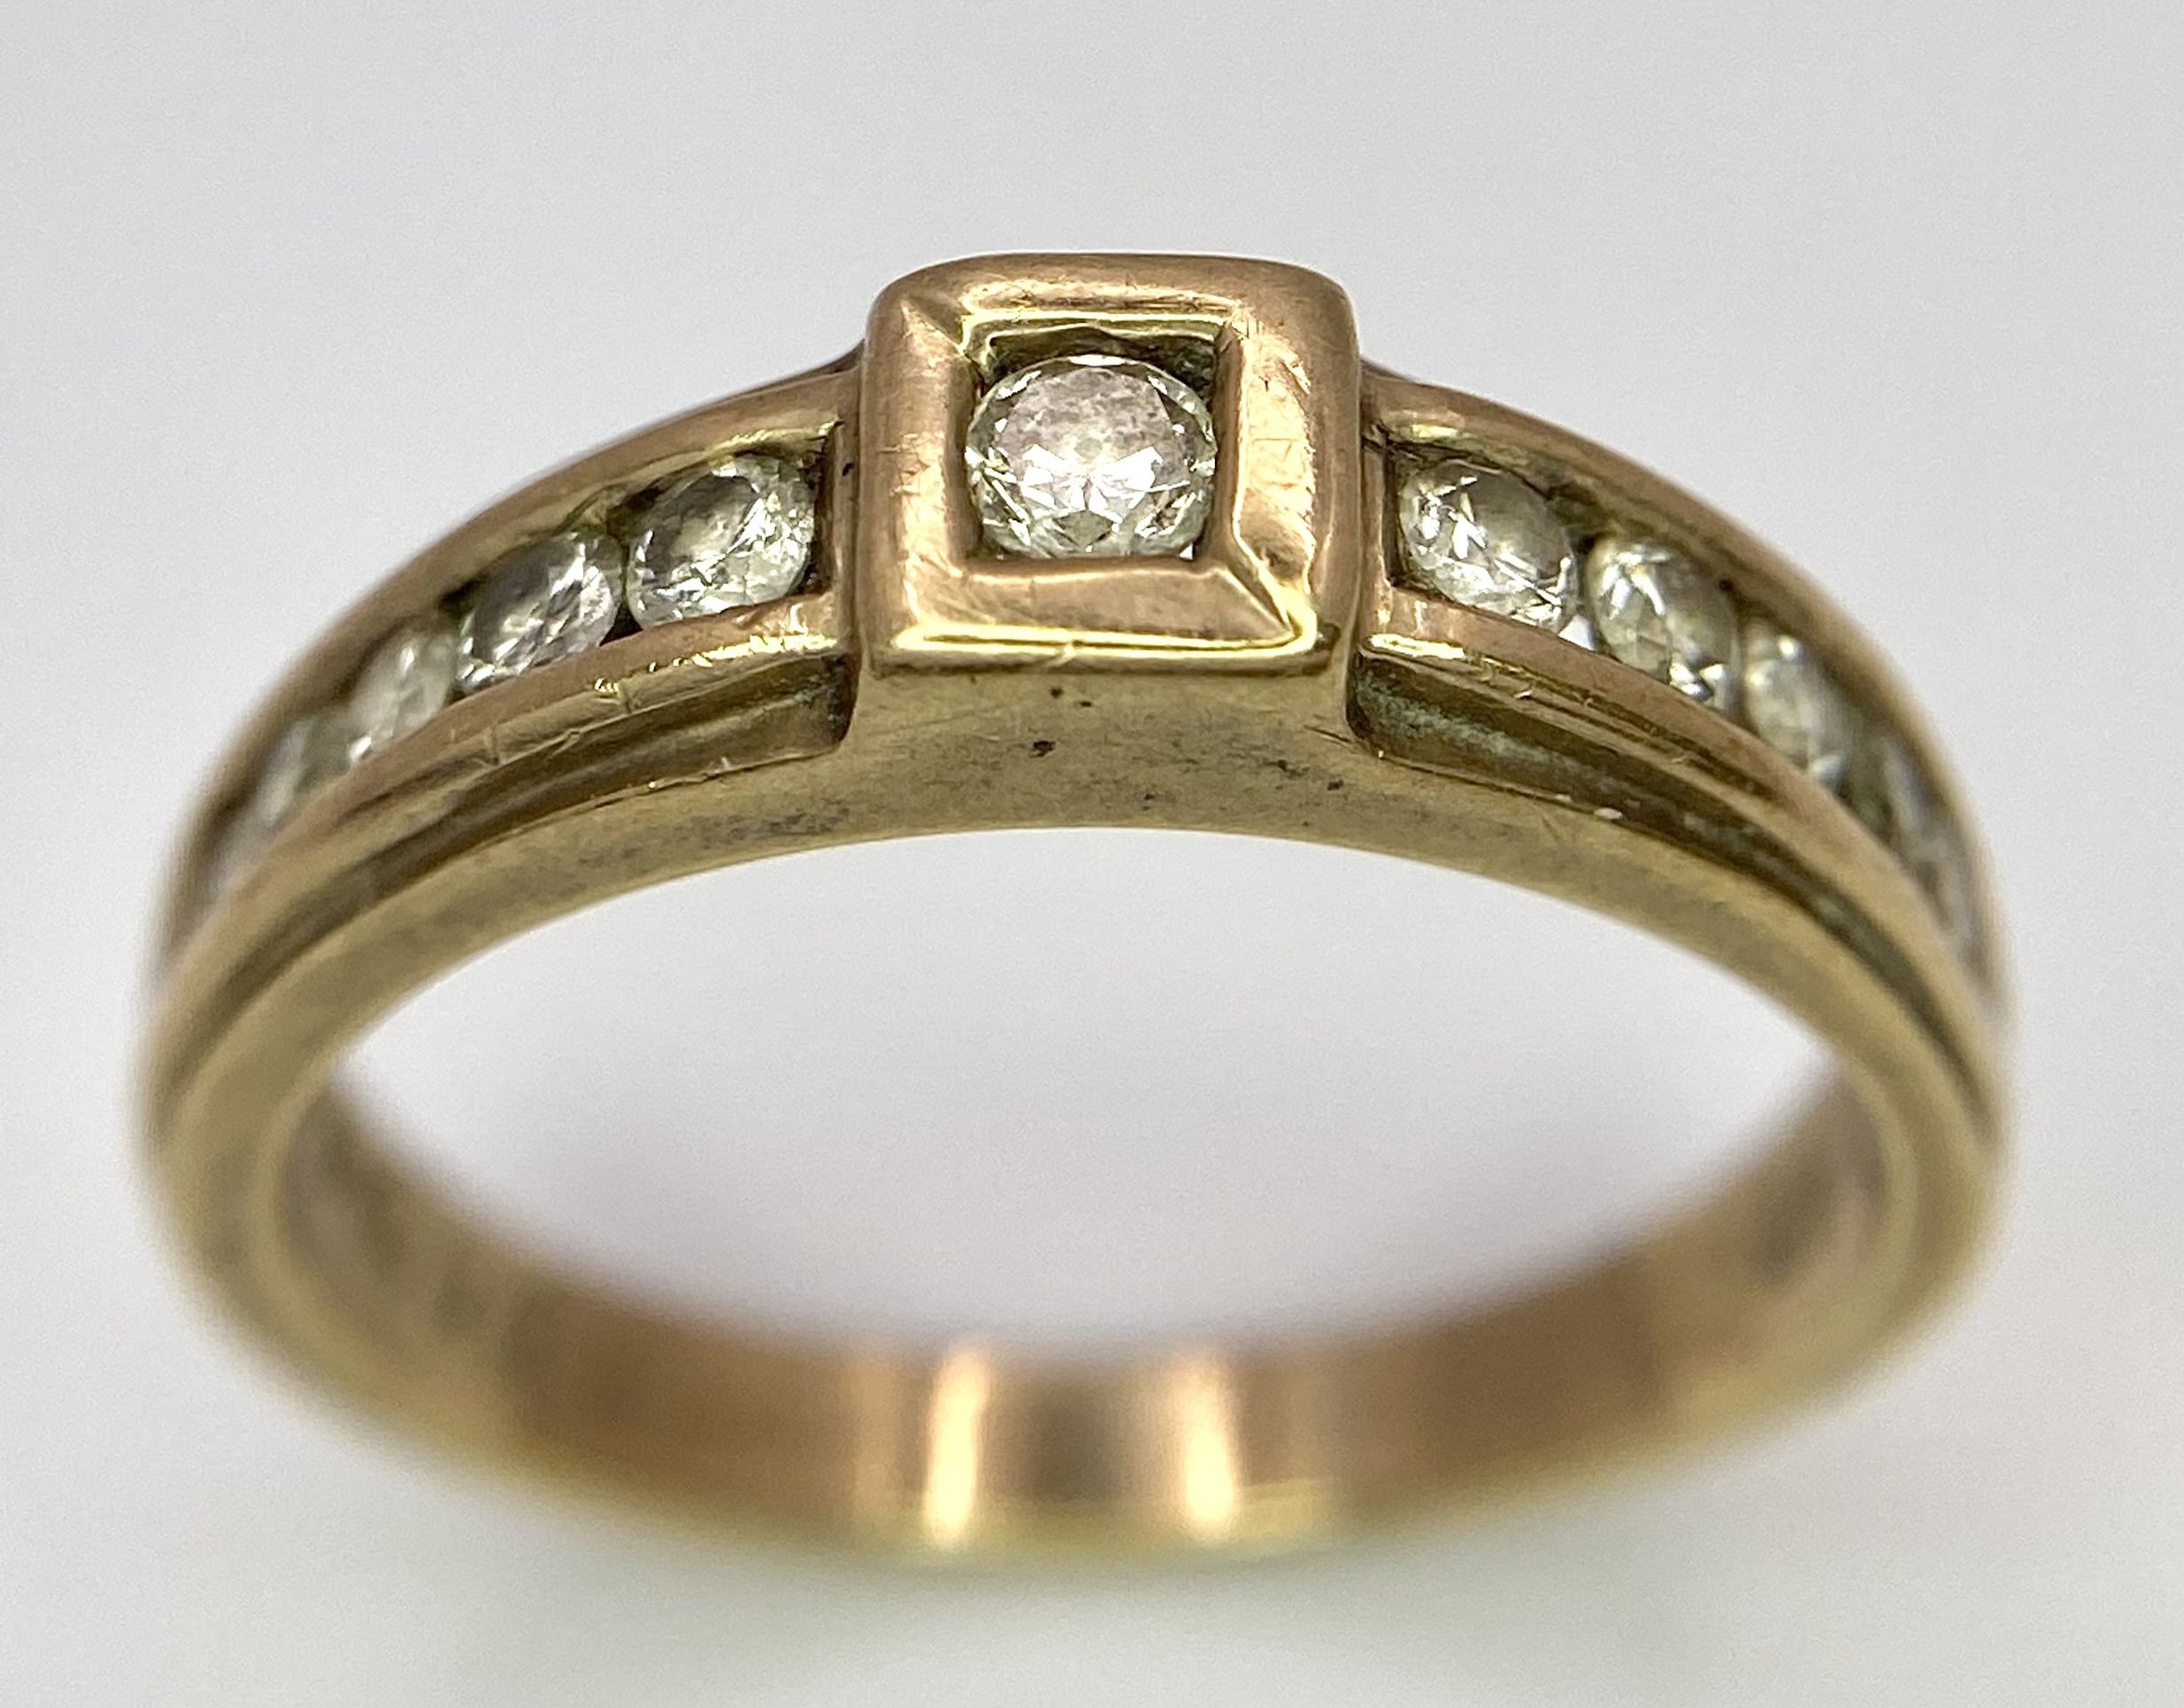 A Vintage 9K Yellow Gold Diamond Half-Eternity Ring. Belt buckle design. Size R. 3.7g total weight. - Image 3 of 6